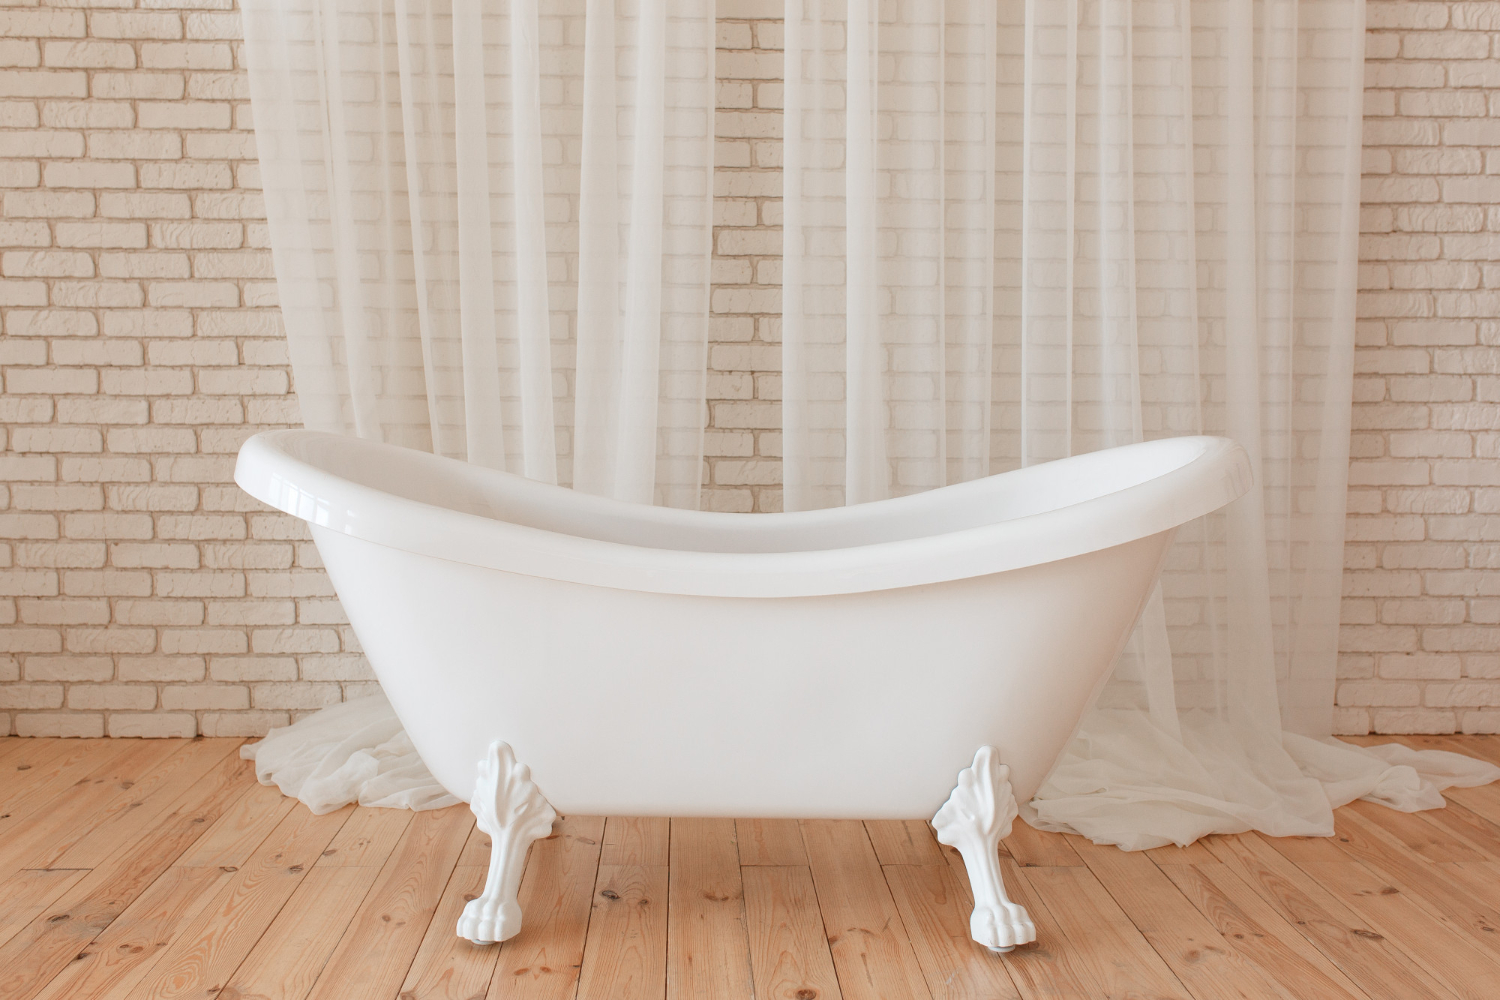 Free-standing bathtub – advantages and disadvantages of this solution